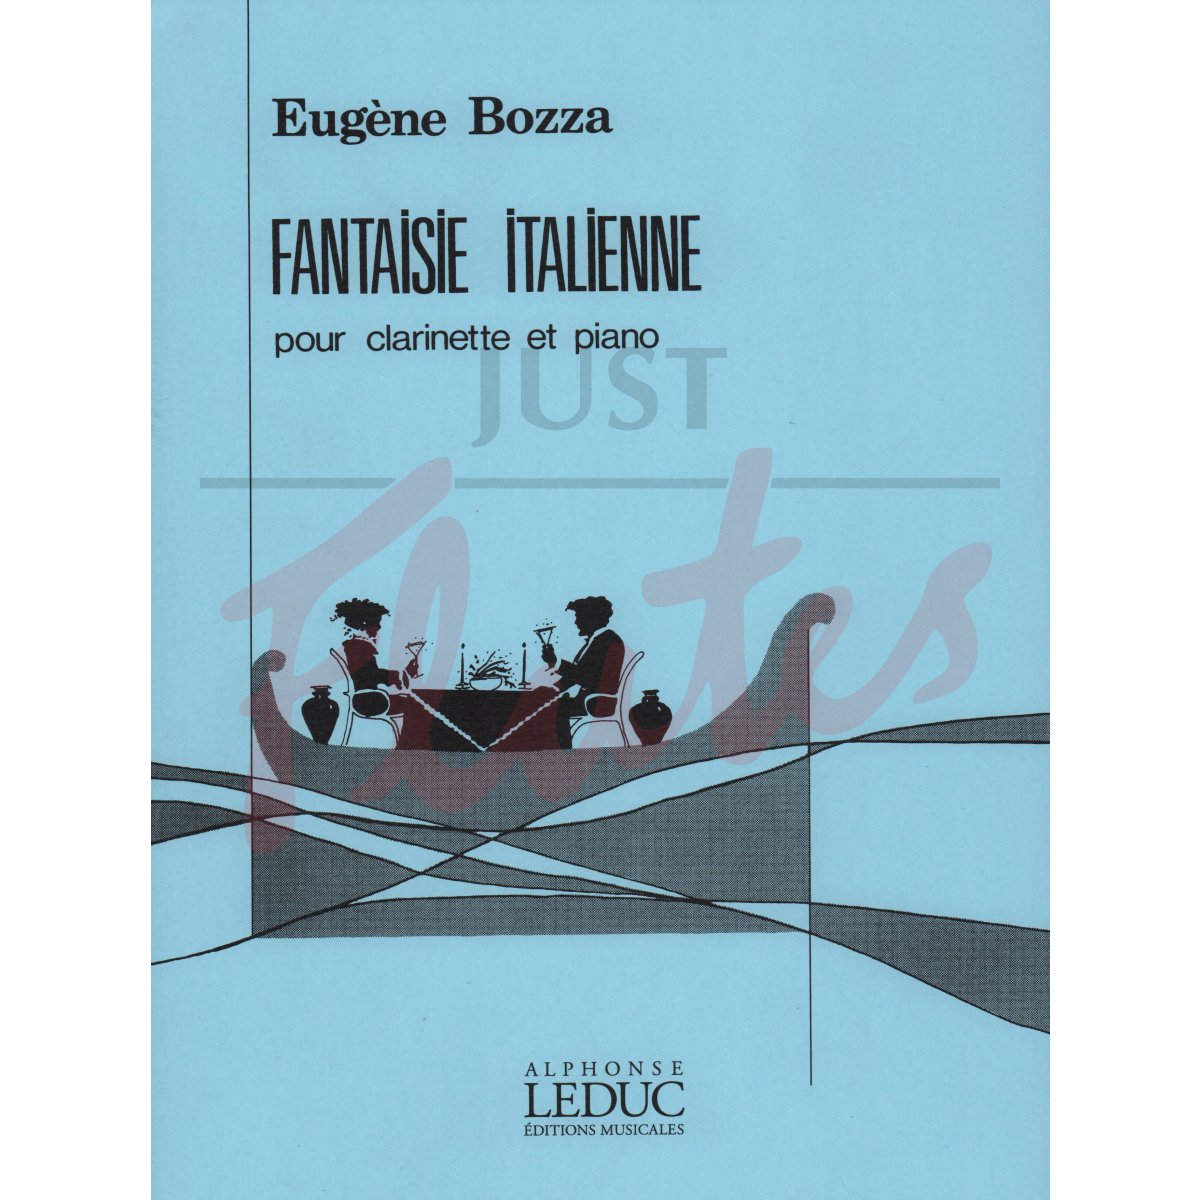 Fantasie Italienne for Clarinet and Piano